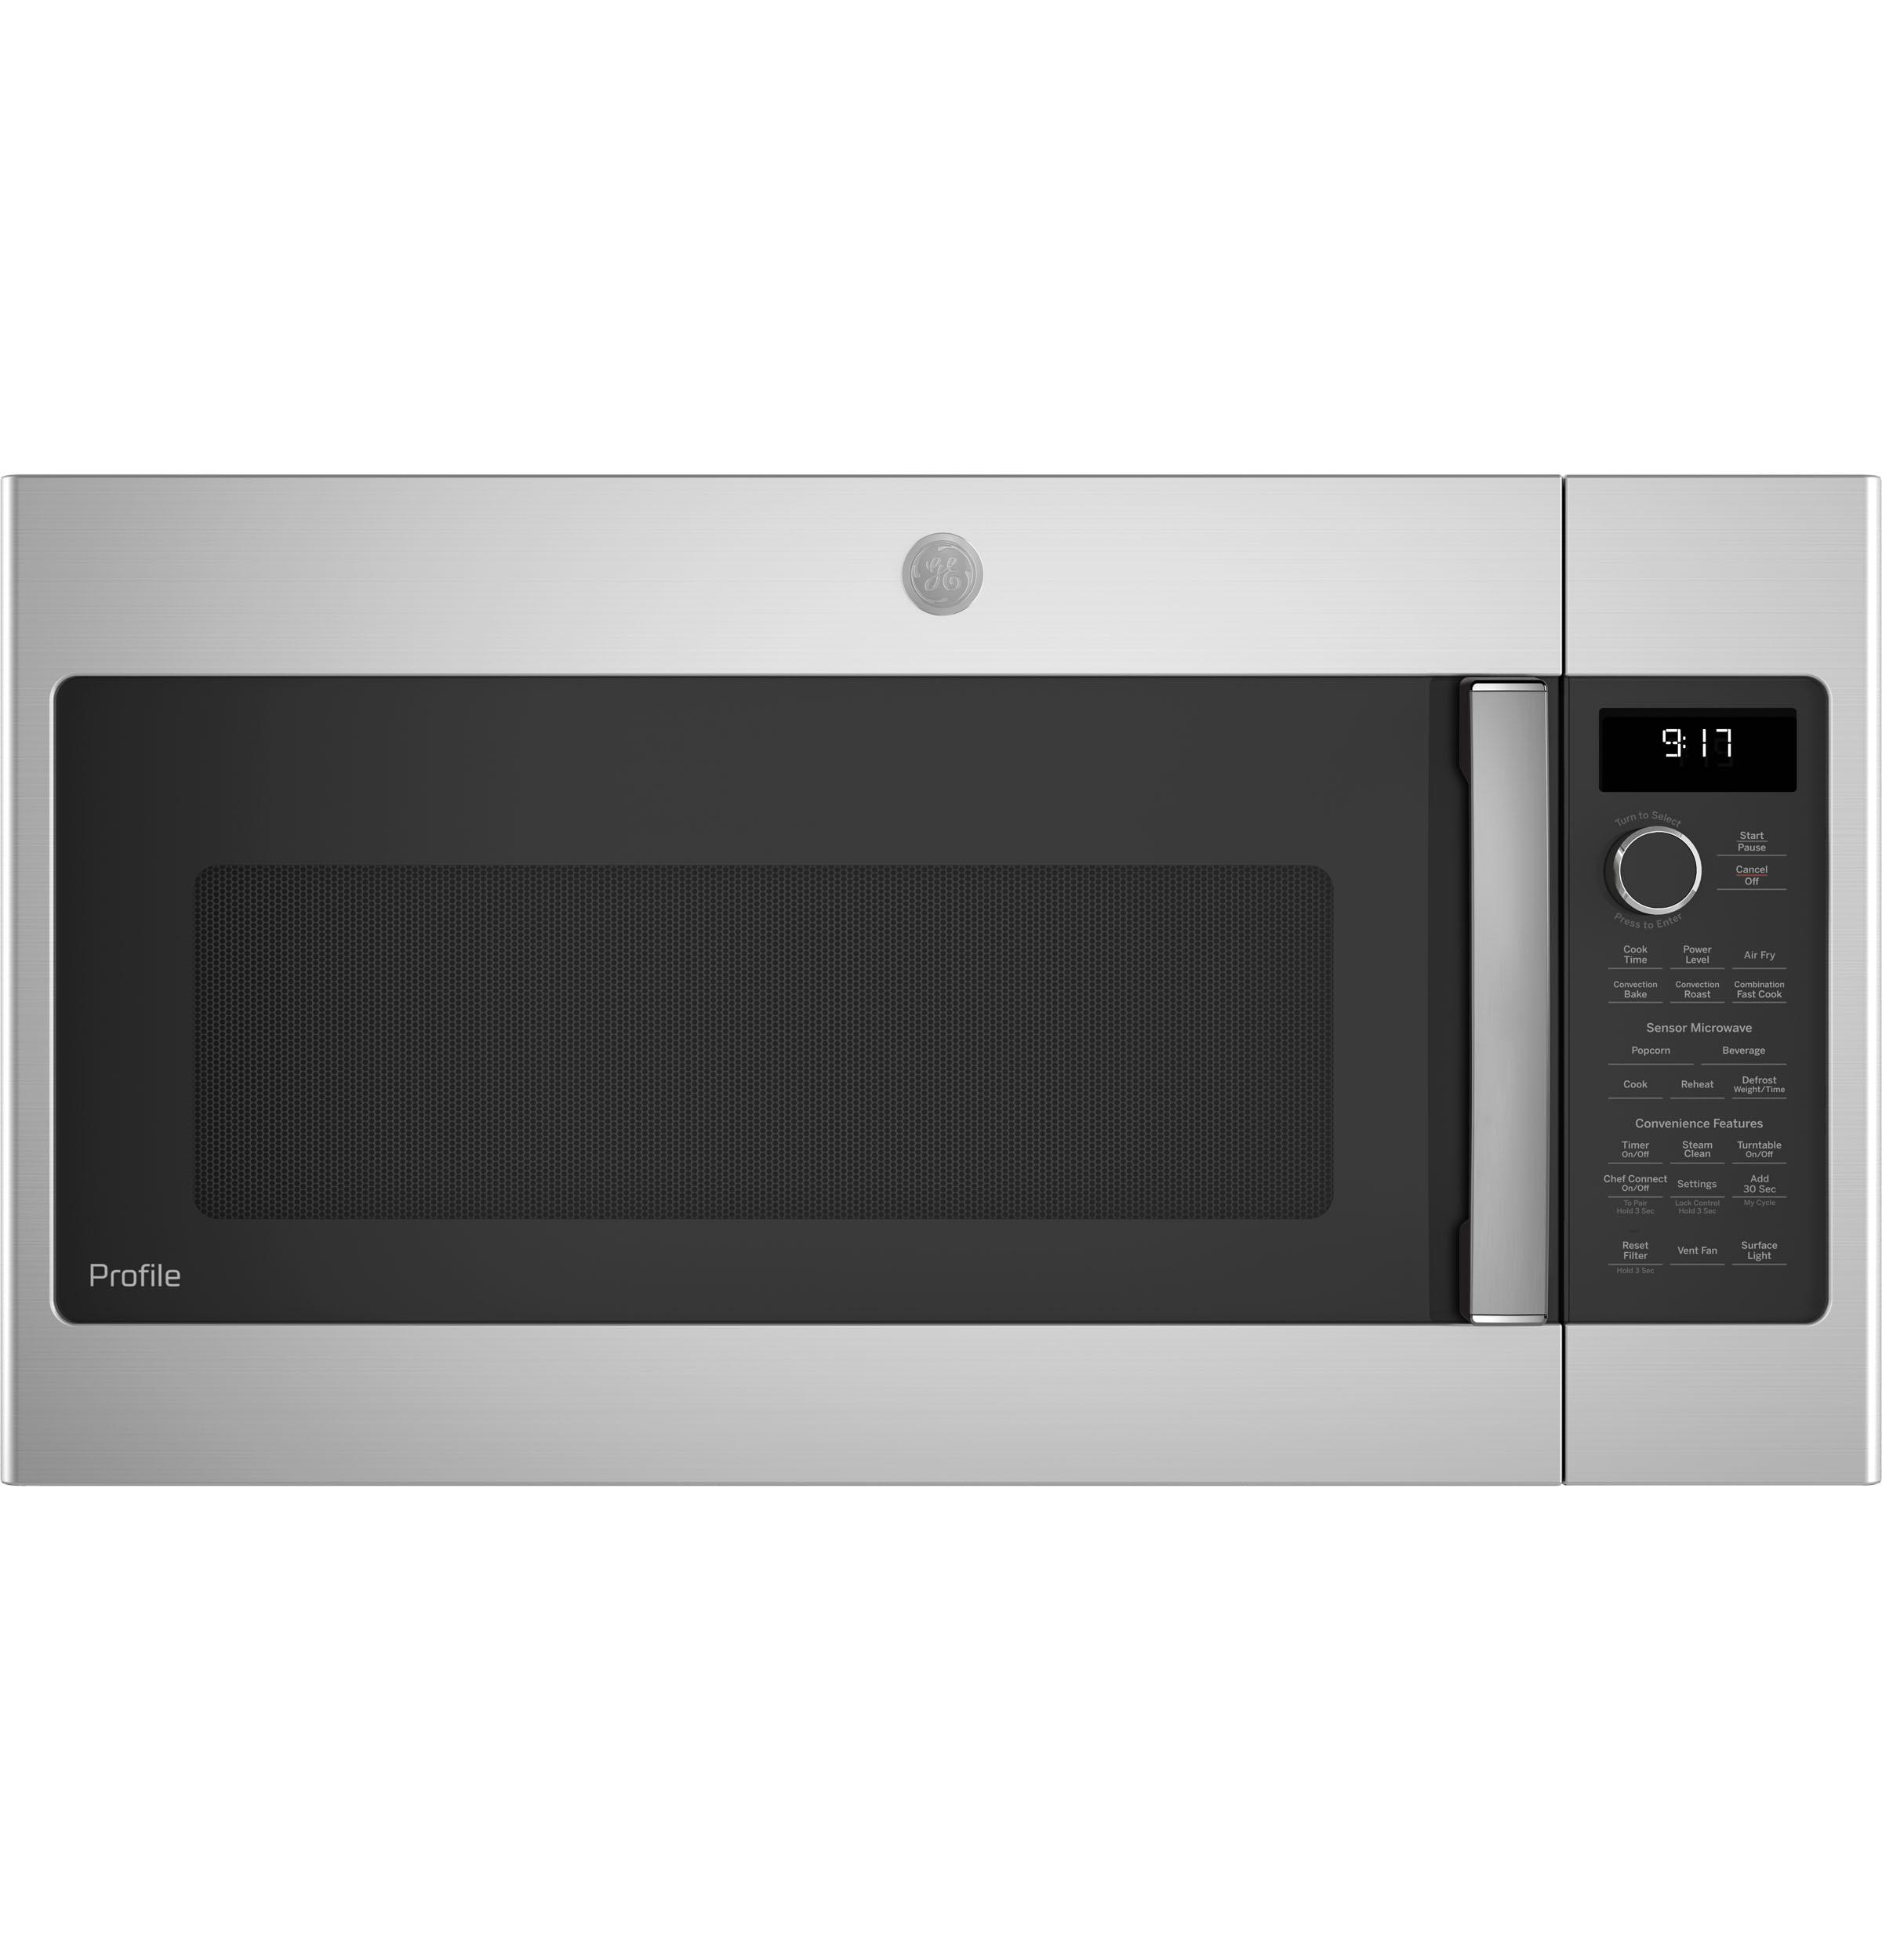 General Electric 1.7 Cu. Ft. Convection Over-the-Range Microwave Oven